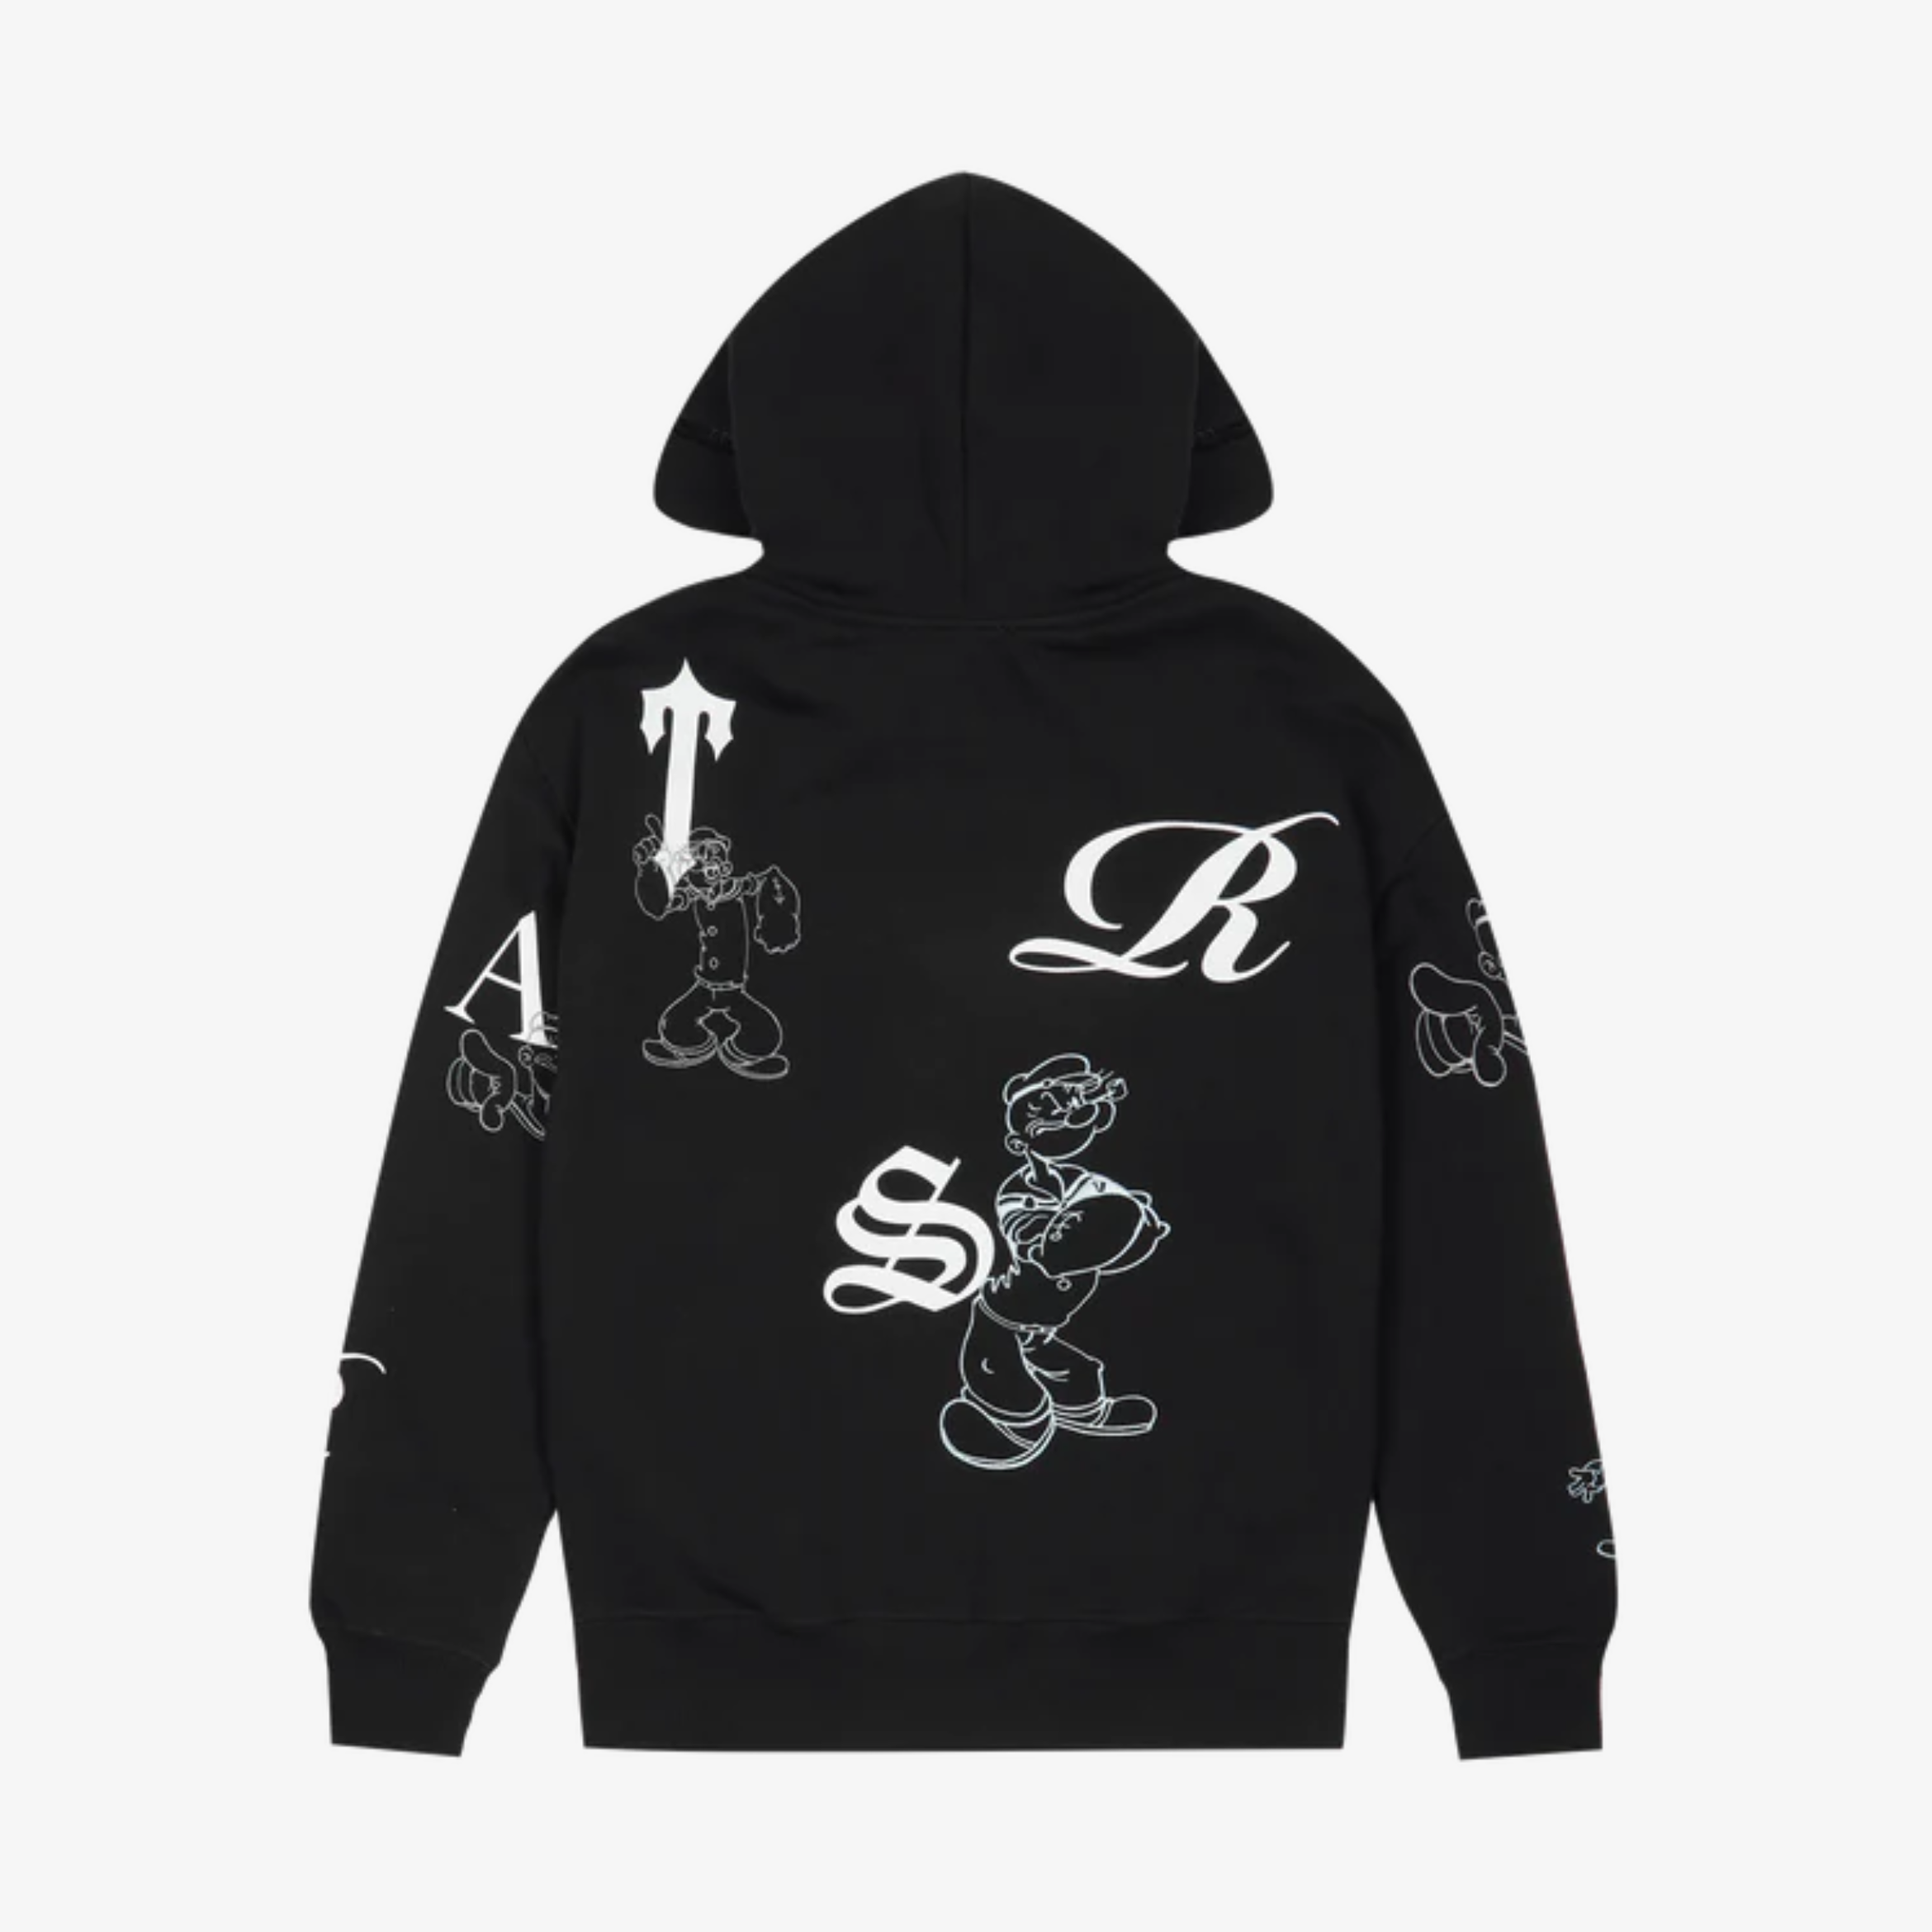 TRAPSTAR X ICEBERG EMBROIDERED AND PRINTED POPEYE HOODIE